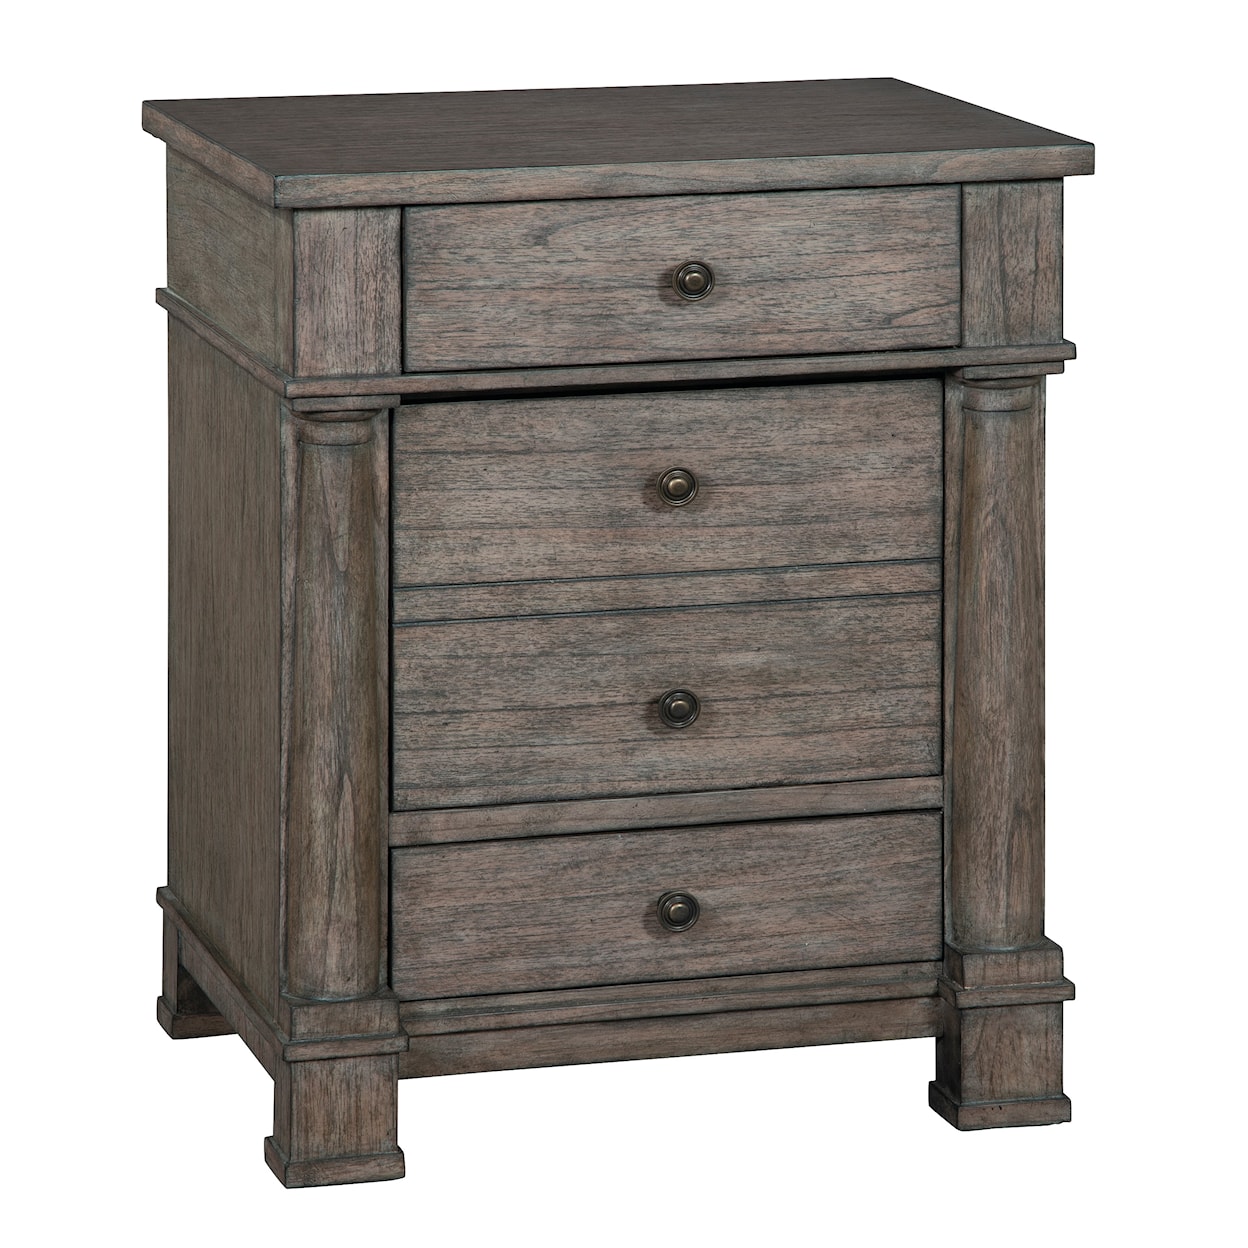 Hekman Lincoln Park File Cabinet